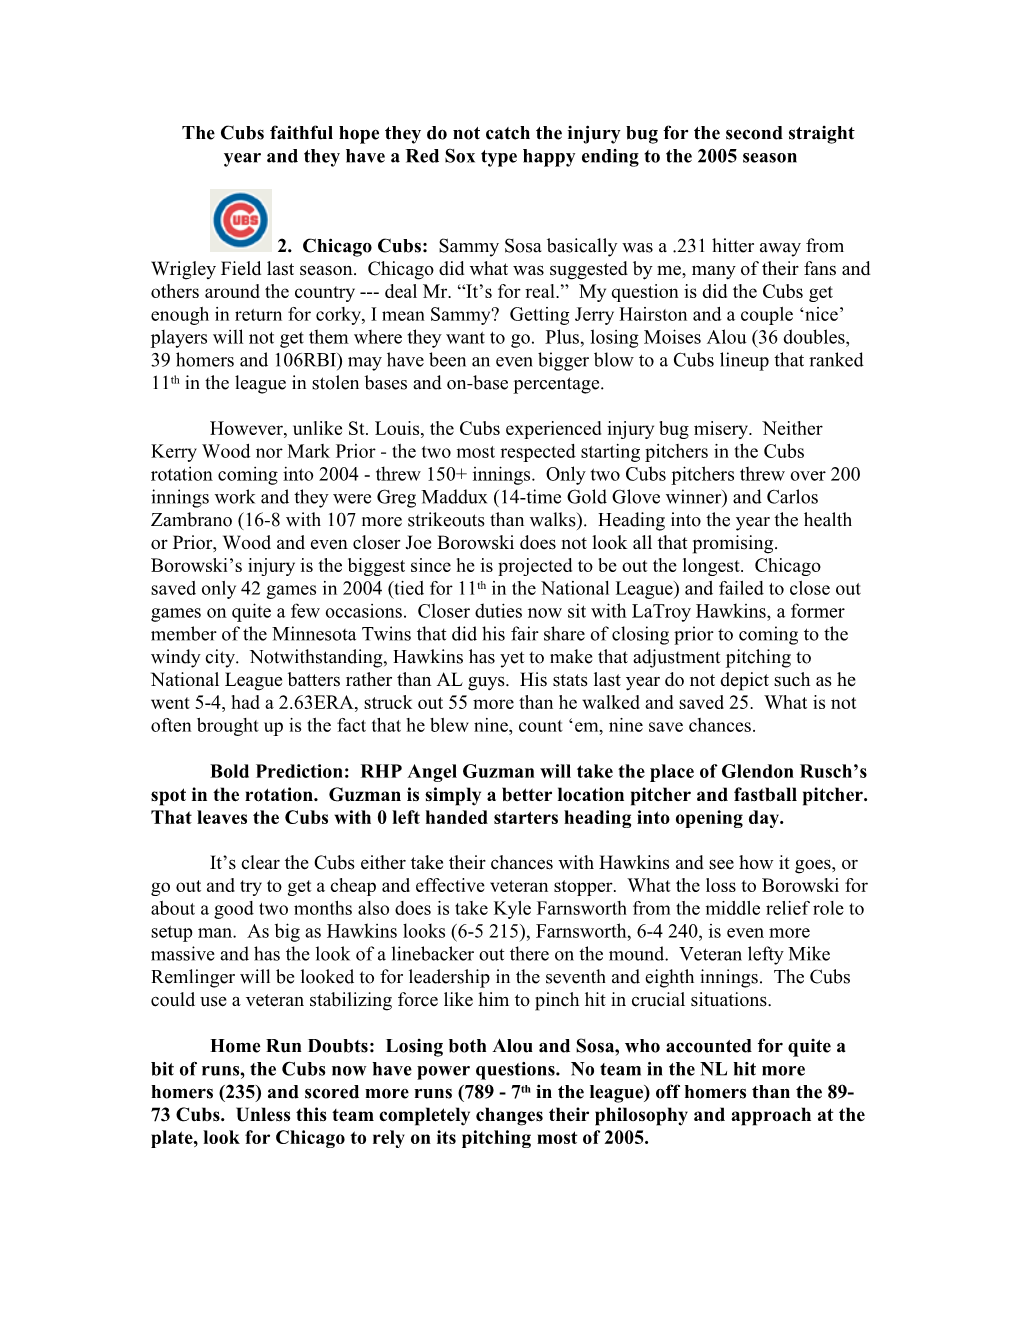 The Cubs Faithful Hope They Do Not Catch the Injury Bug for the Second Straight Year and They Have a Red Sox Type Happy Ending to the 2005 Season